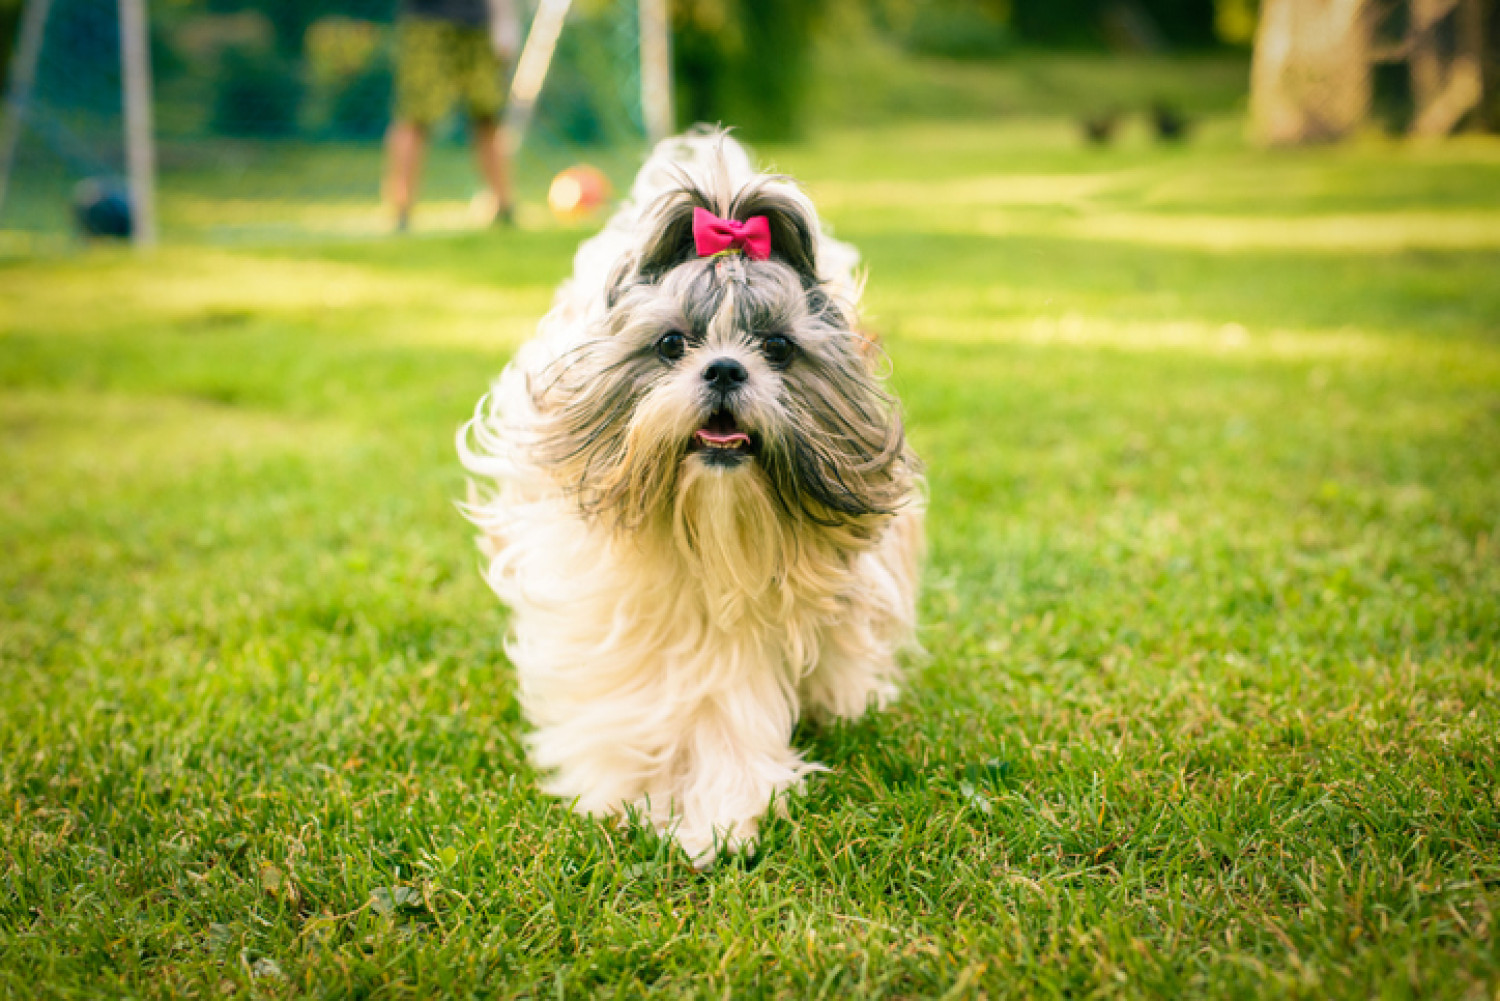 A playful Shih Tzu with a red bow on its head frolics on a green lawn, showcasing the breed's suitability for companionship and comfort for individuals with dementia.